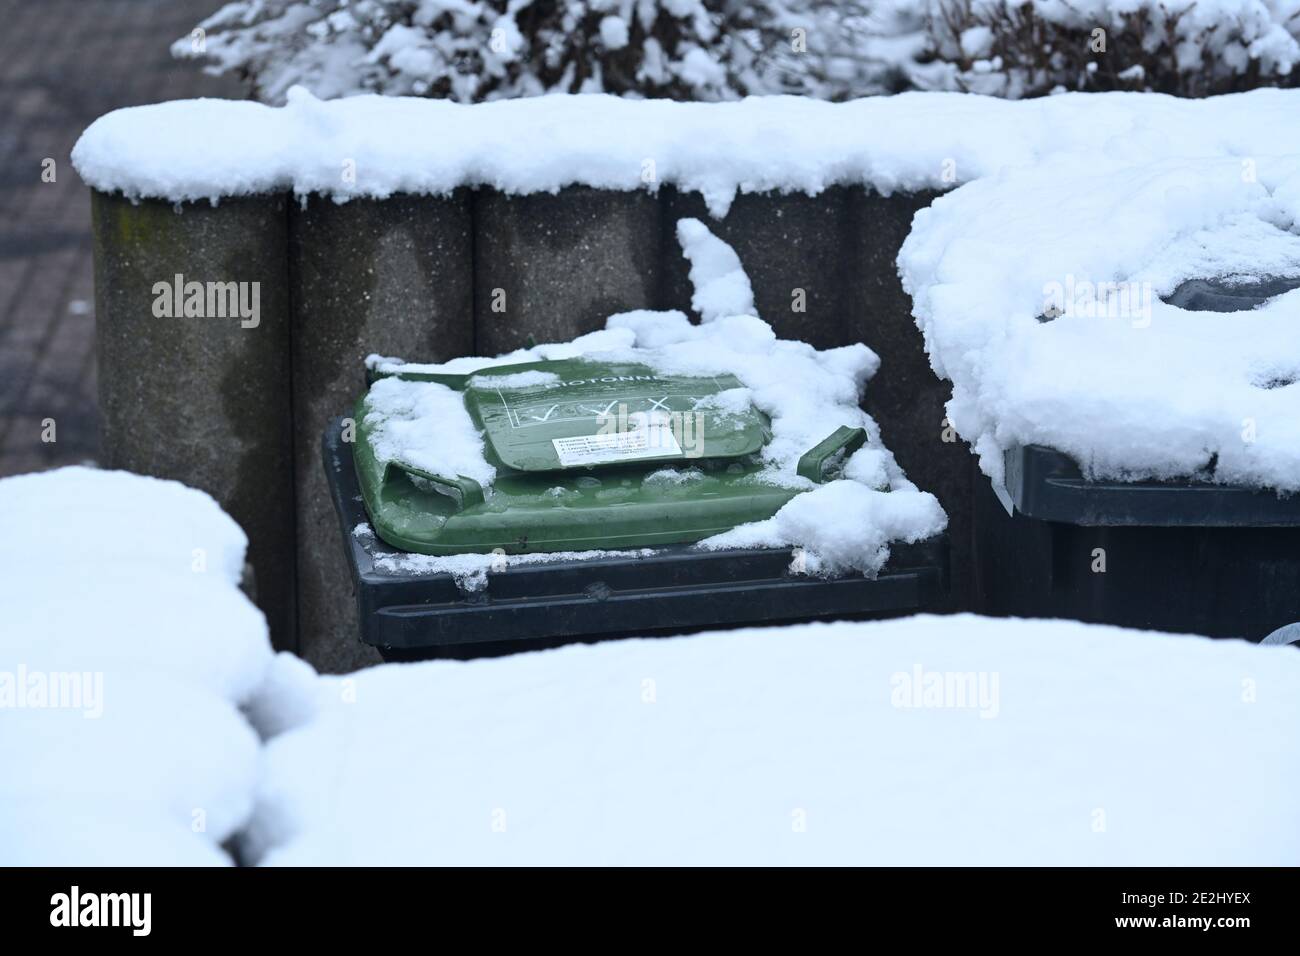 Leipzig, Germany. 09th Jan, 2020. Rubbish bins covered with fresh snow stand next to each other. The green bin is visible. Credit: Volkmar Heinz/dpa-Zentralbild/ZB/dpa/Alamy Live News Stock Photo